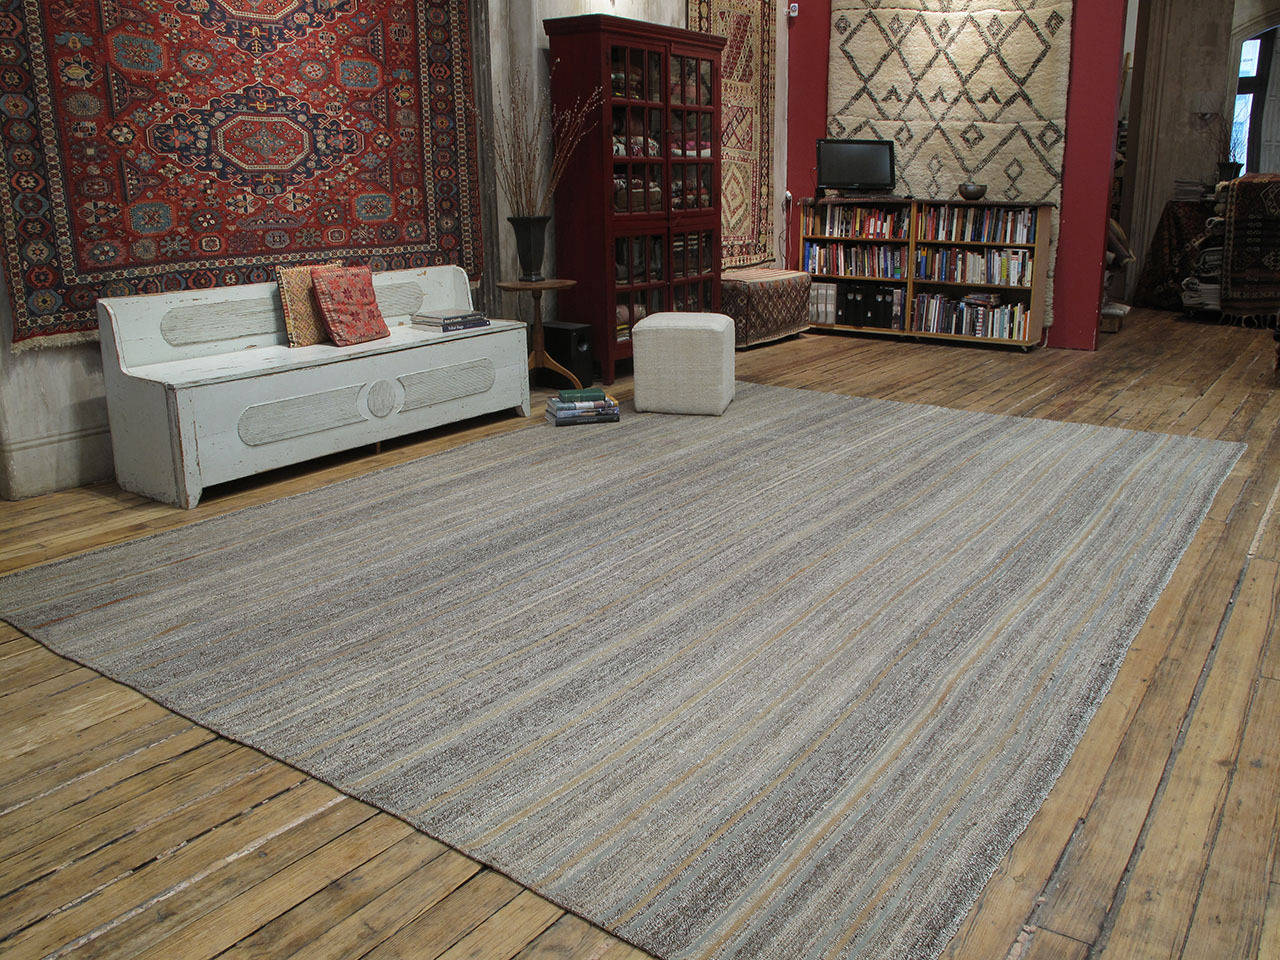 An unusually large tribal floor cover, most probably from Southeastern Turkey, woven with a mixture of wool and goat hair in very pleasing tones of natural brown and gray and cotton stripes. The subtle beauty of this piece, further enhanced by its